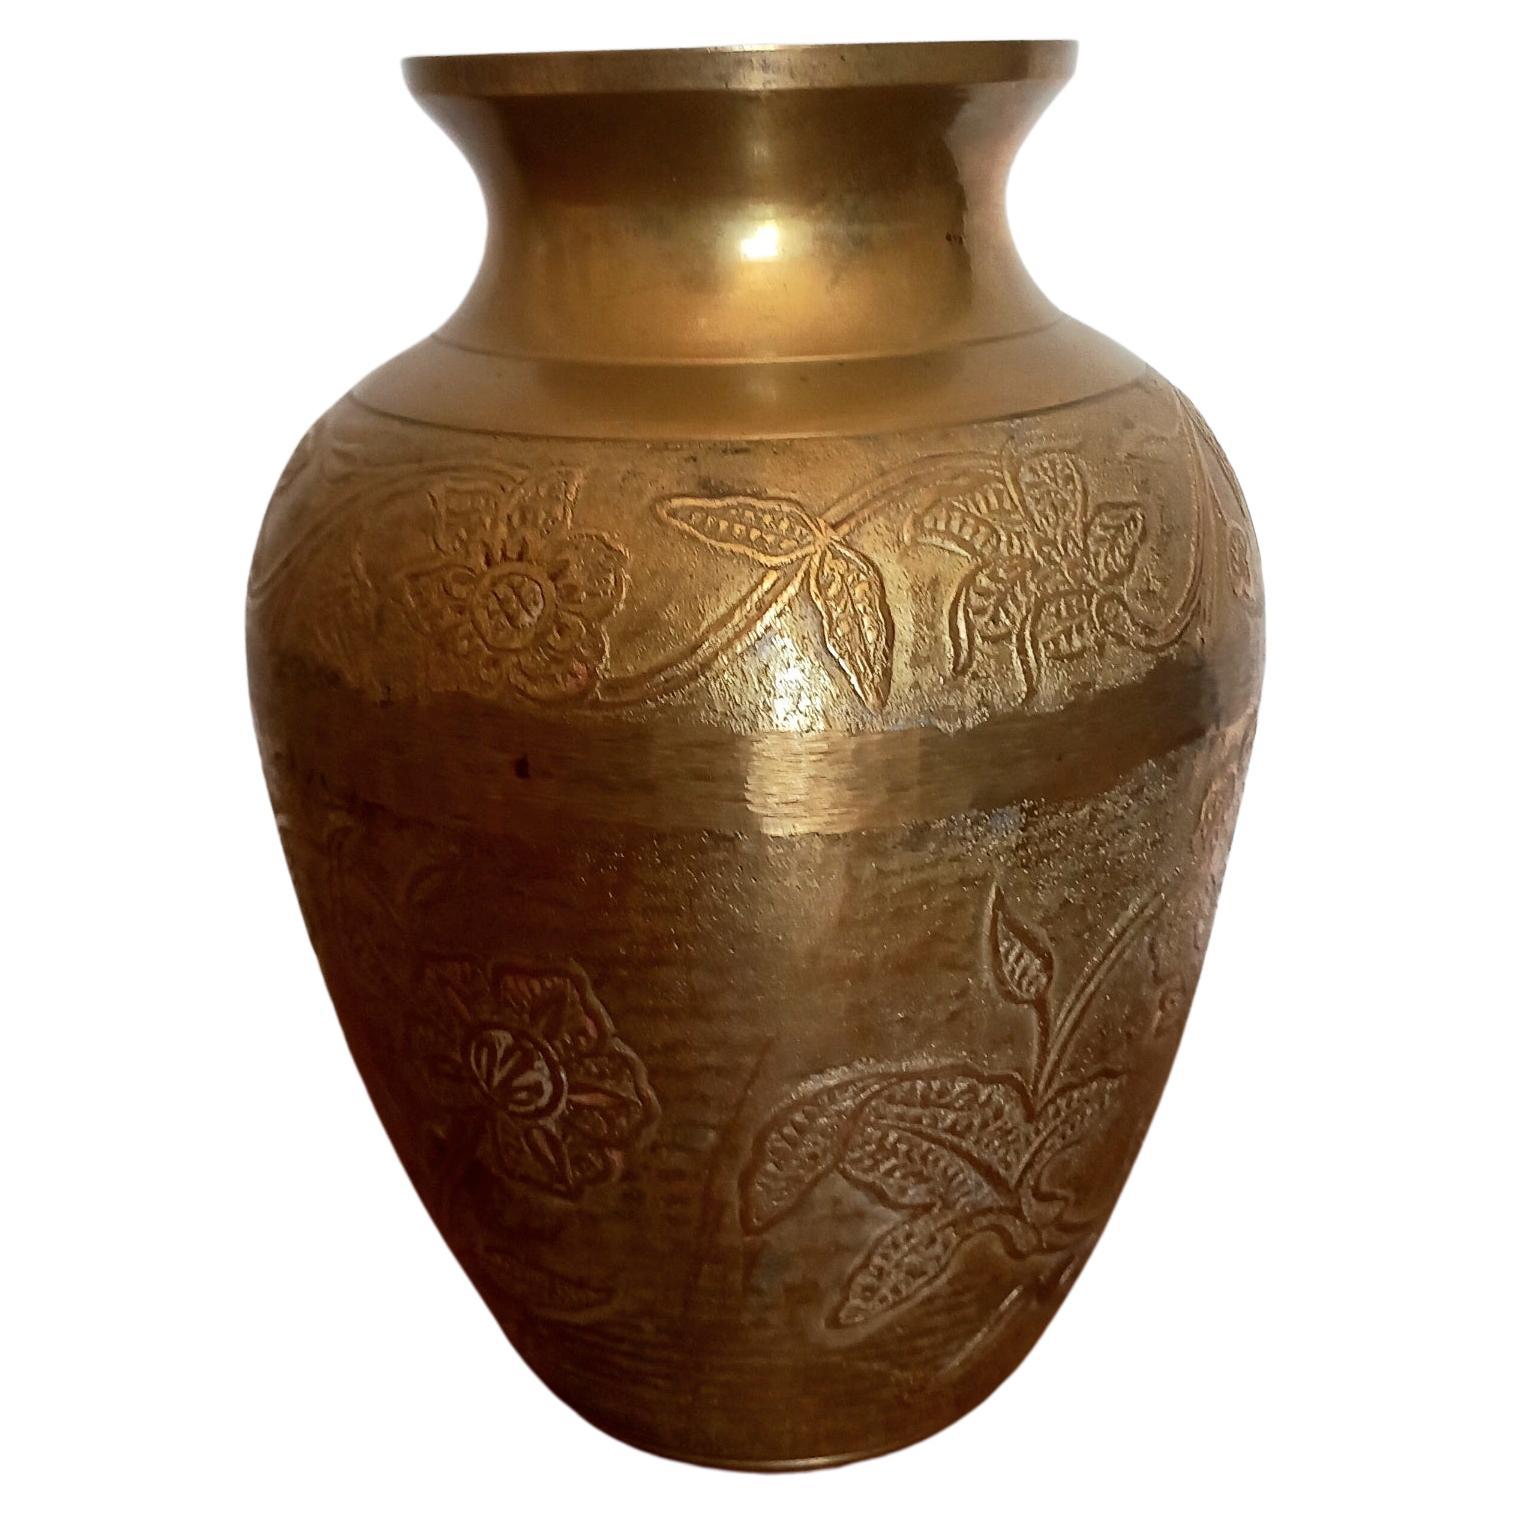 Carved brass vase
Vase of classic shape, with carved floral filigree
Vase for flowers or to put alone

It is a solid piece, it is not a sheet metal.